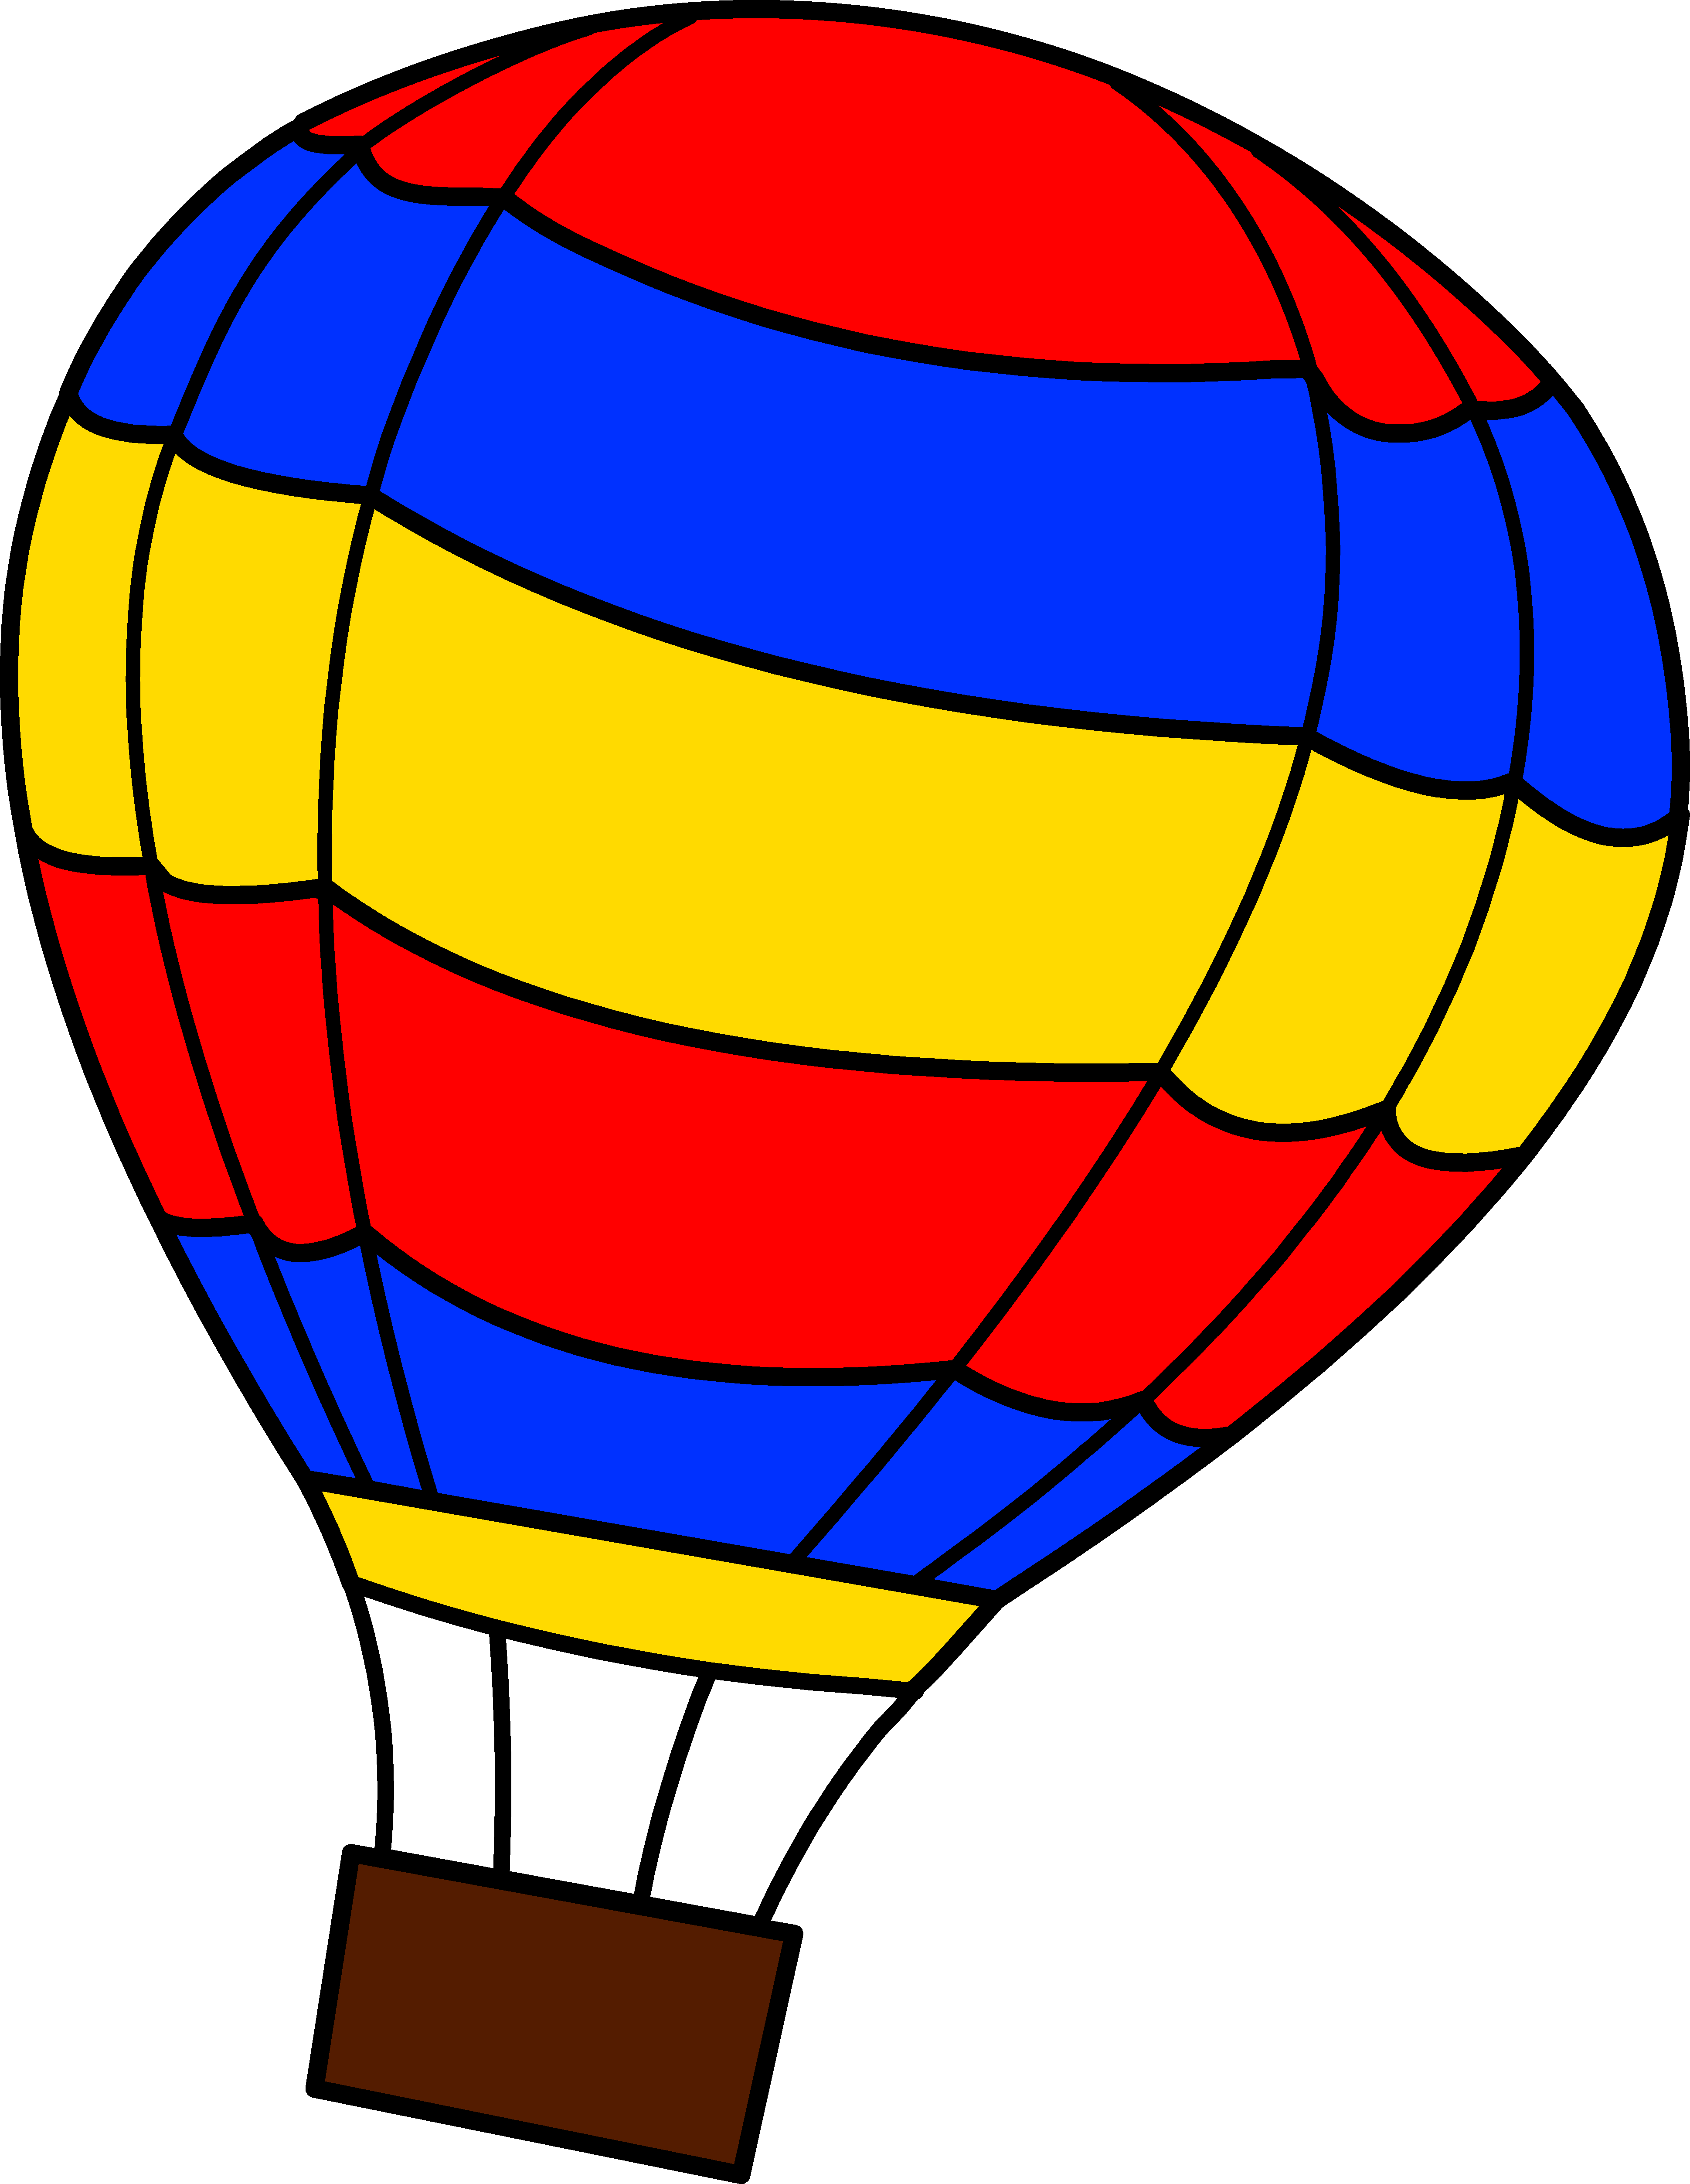 Colorful Hot Air Balloon Clipart | Clipart Panda - Free Clipart Images